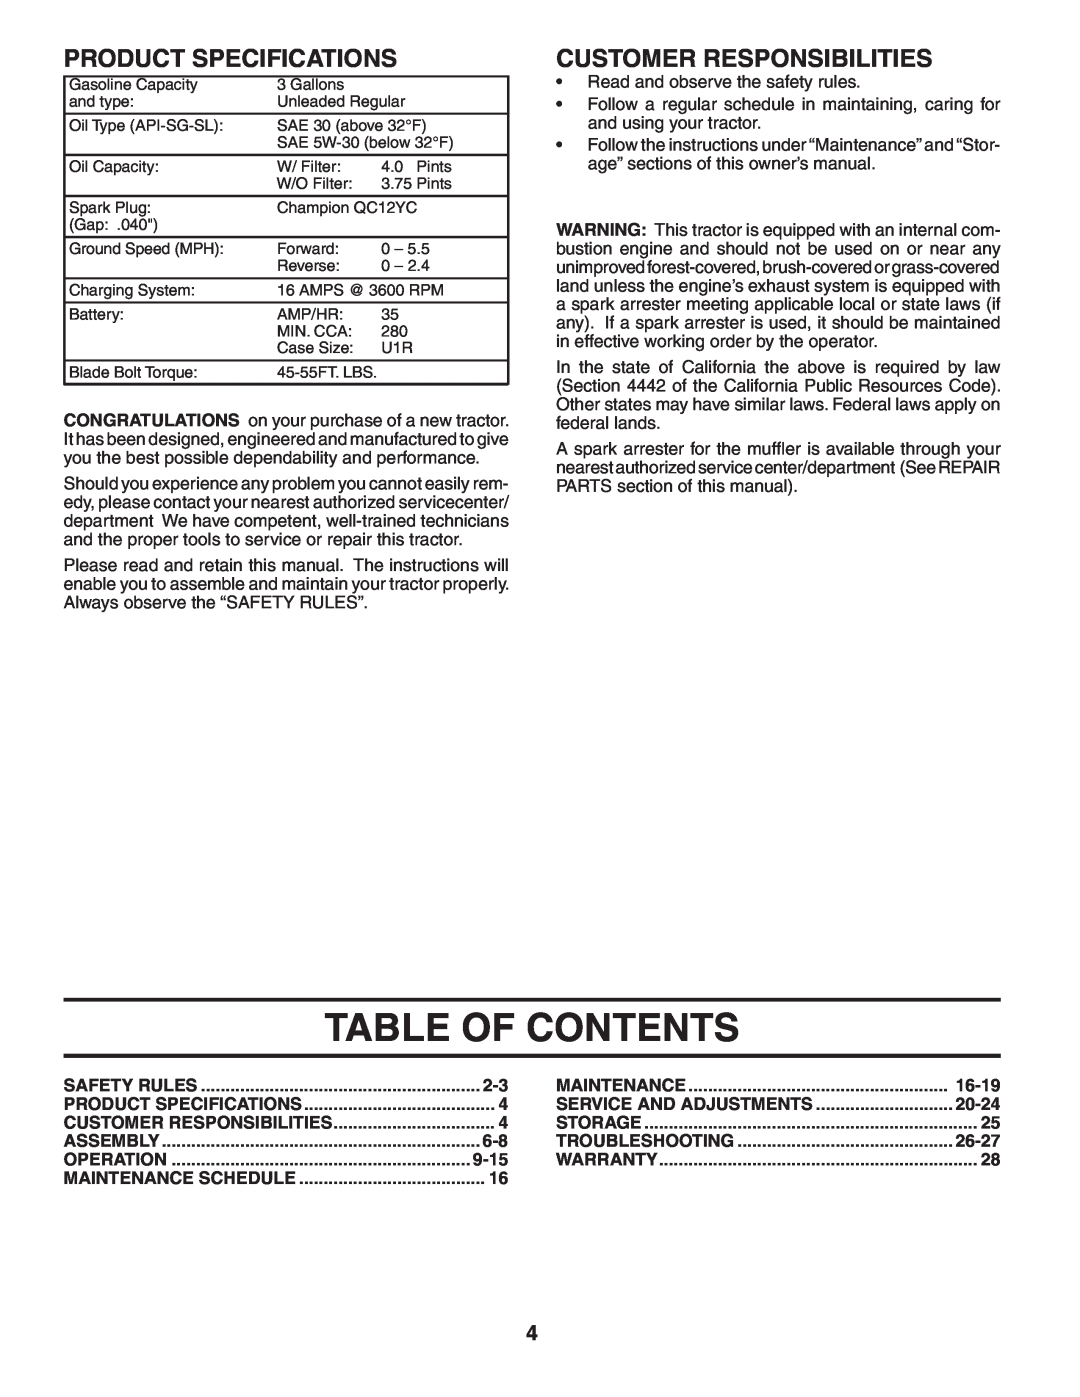 Poulan PB22H54YT manual Table Of Contents, Product Specifications, Customer Responsibilities, 9-15, 16-19, 20-24, 26-27 